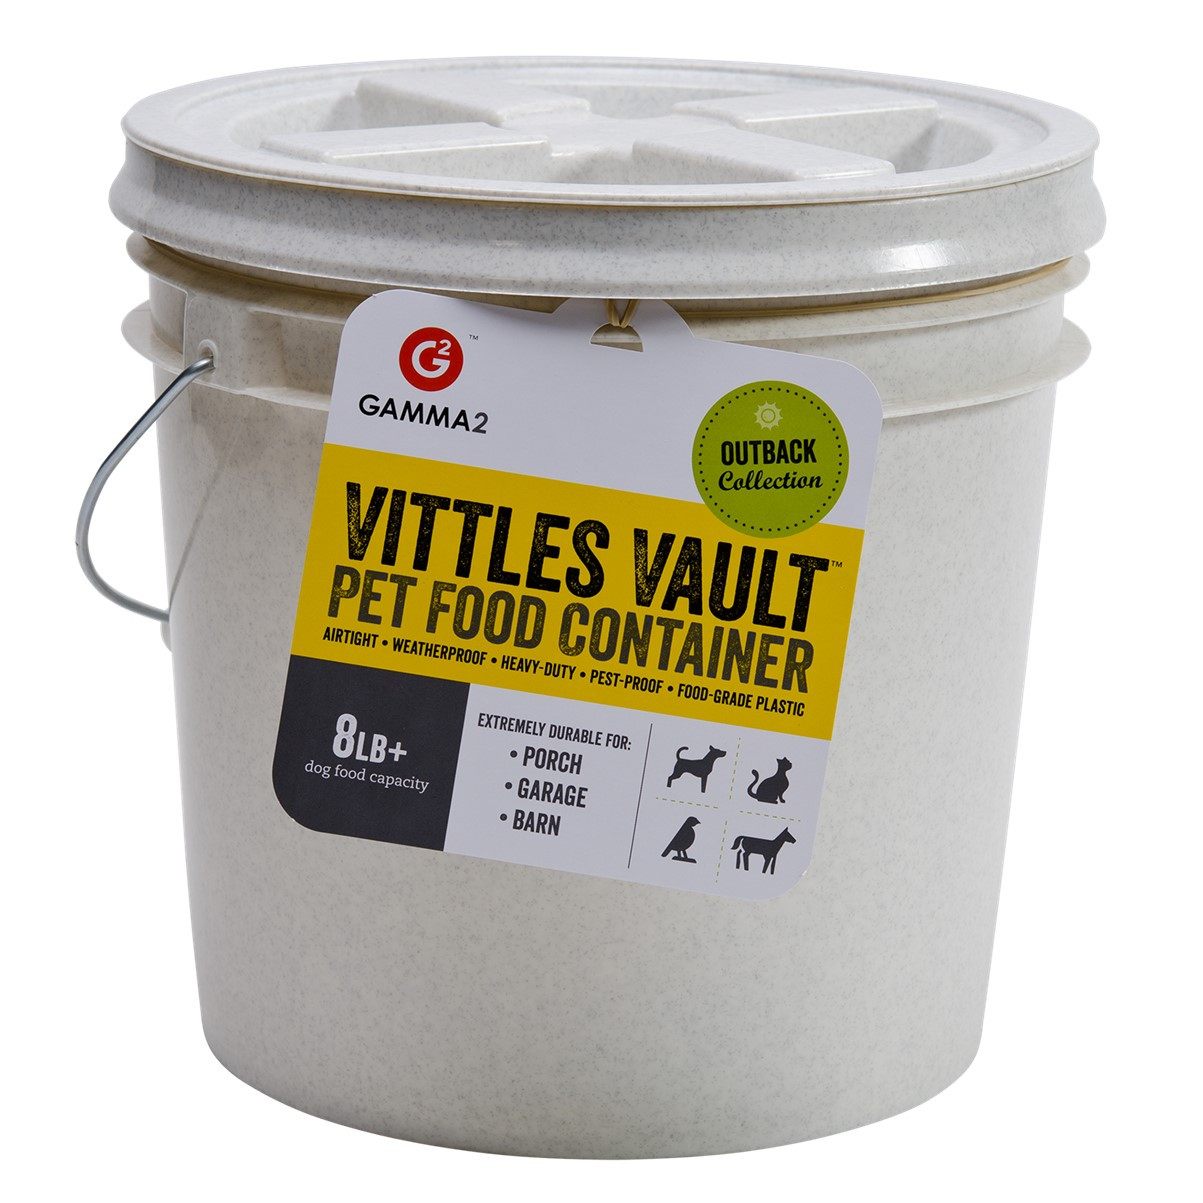 https://cdn1.bigcommerce.com/n-ou1isn/prbz2/products/1714/images/2087/Vittles_Vault_Pet_food_animal_food_airtight_storage_bucket_holds_10_lb._23.49_pt004152_the_actual_product__69431.1602111617.1280.1280.jpg?c=2